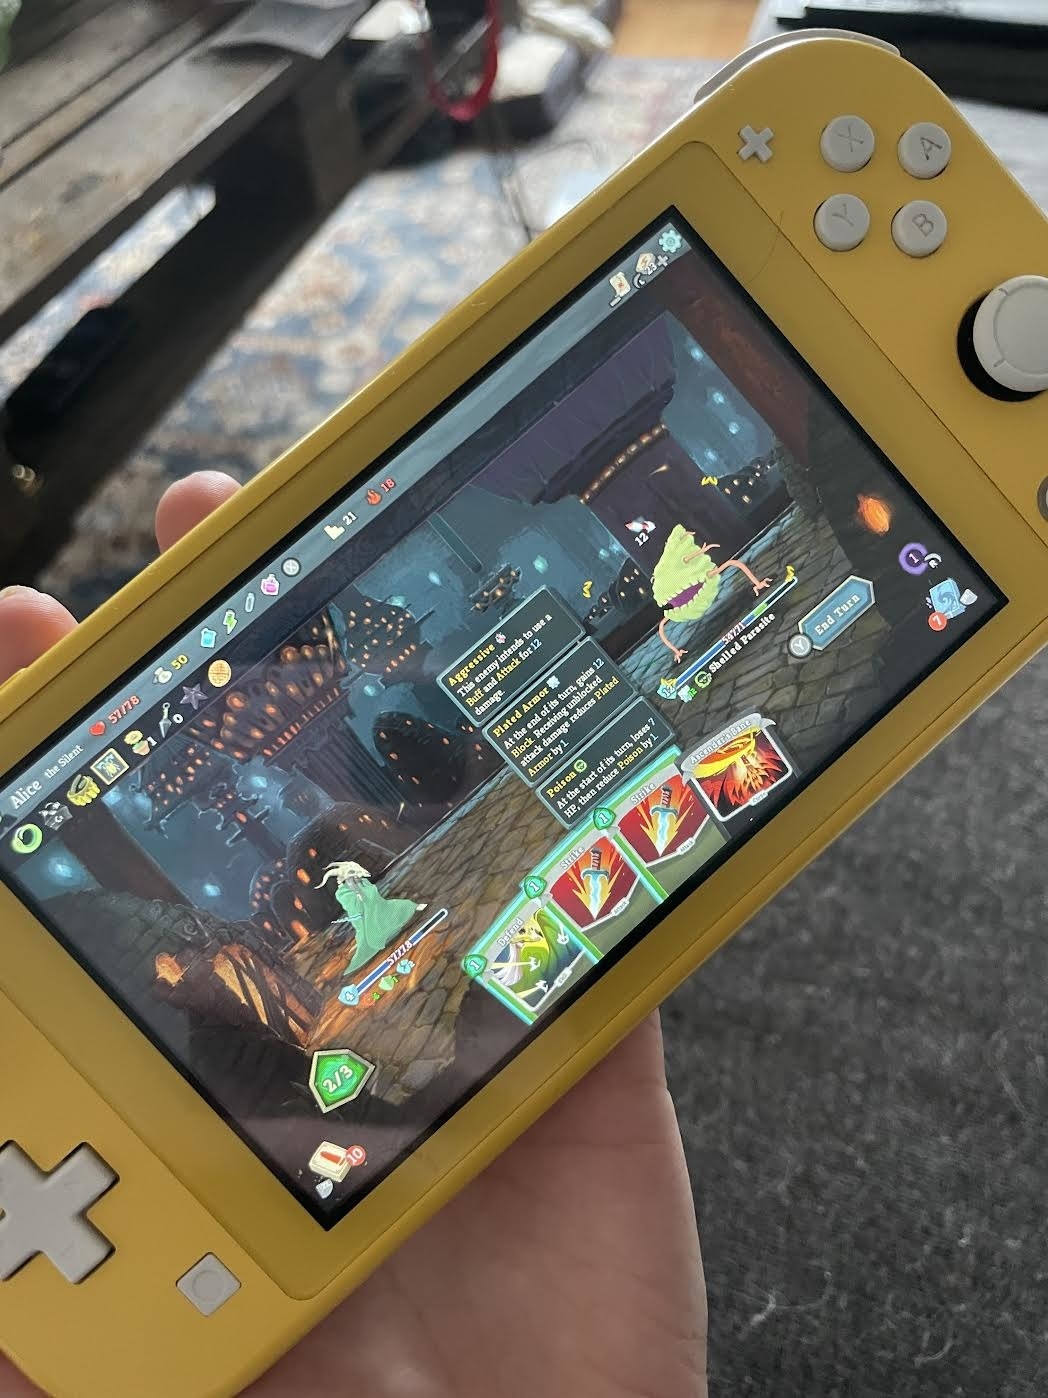 Alice holding her Switch with the game in play